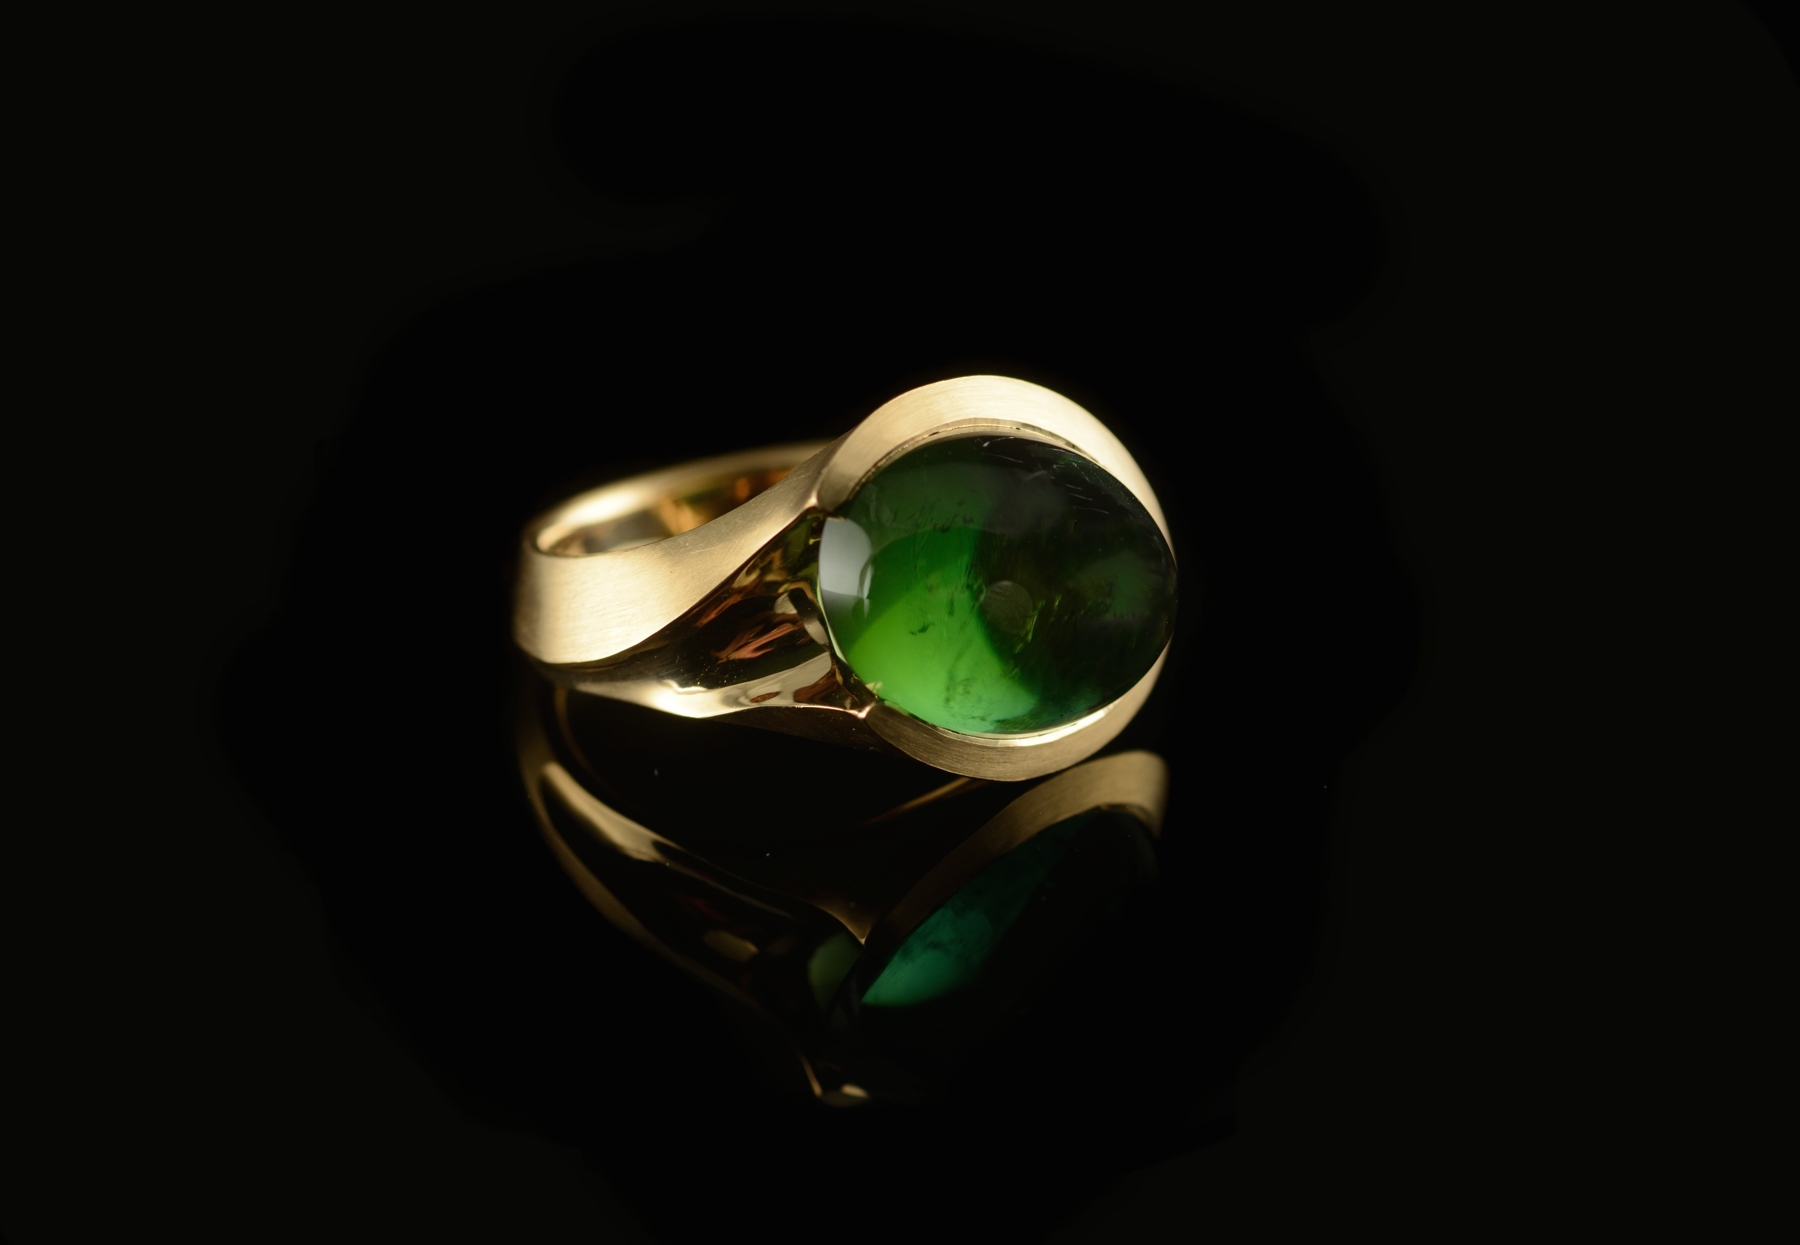 Carved 18ct rose gold and green tourmaline cocktail ring